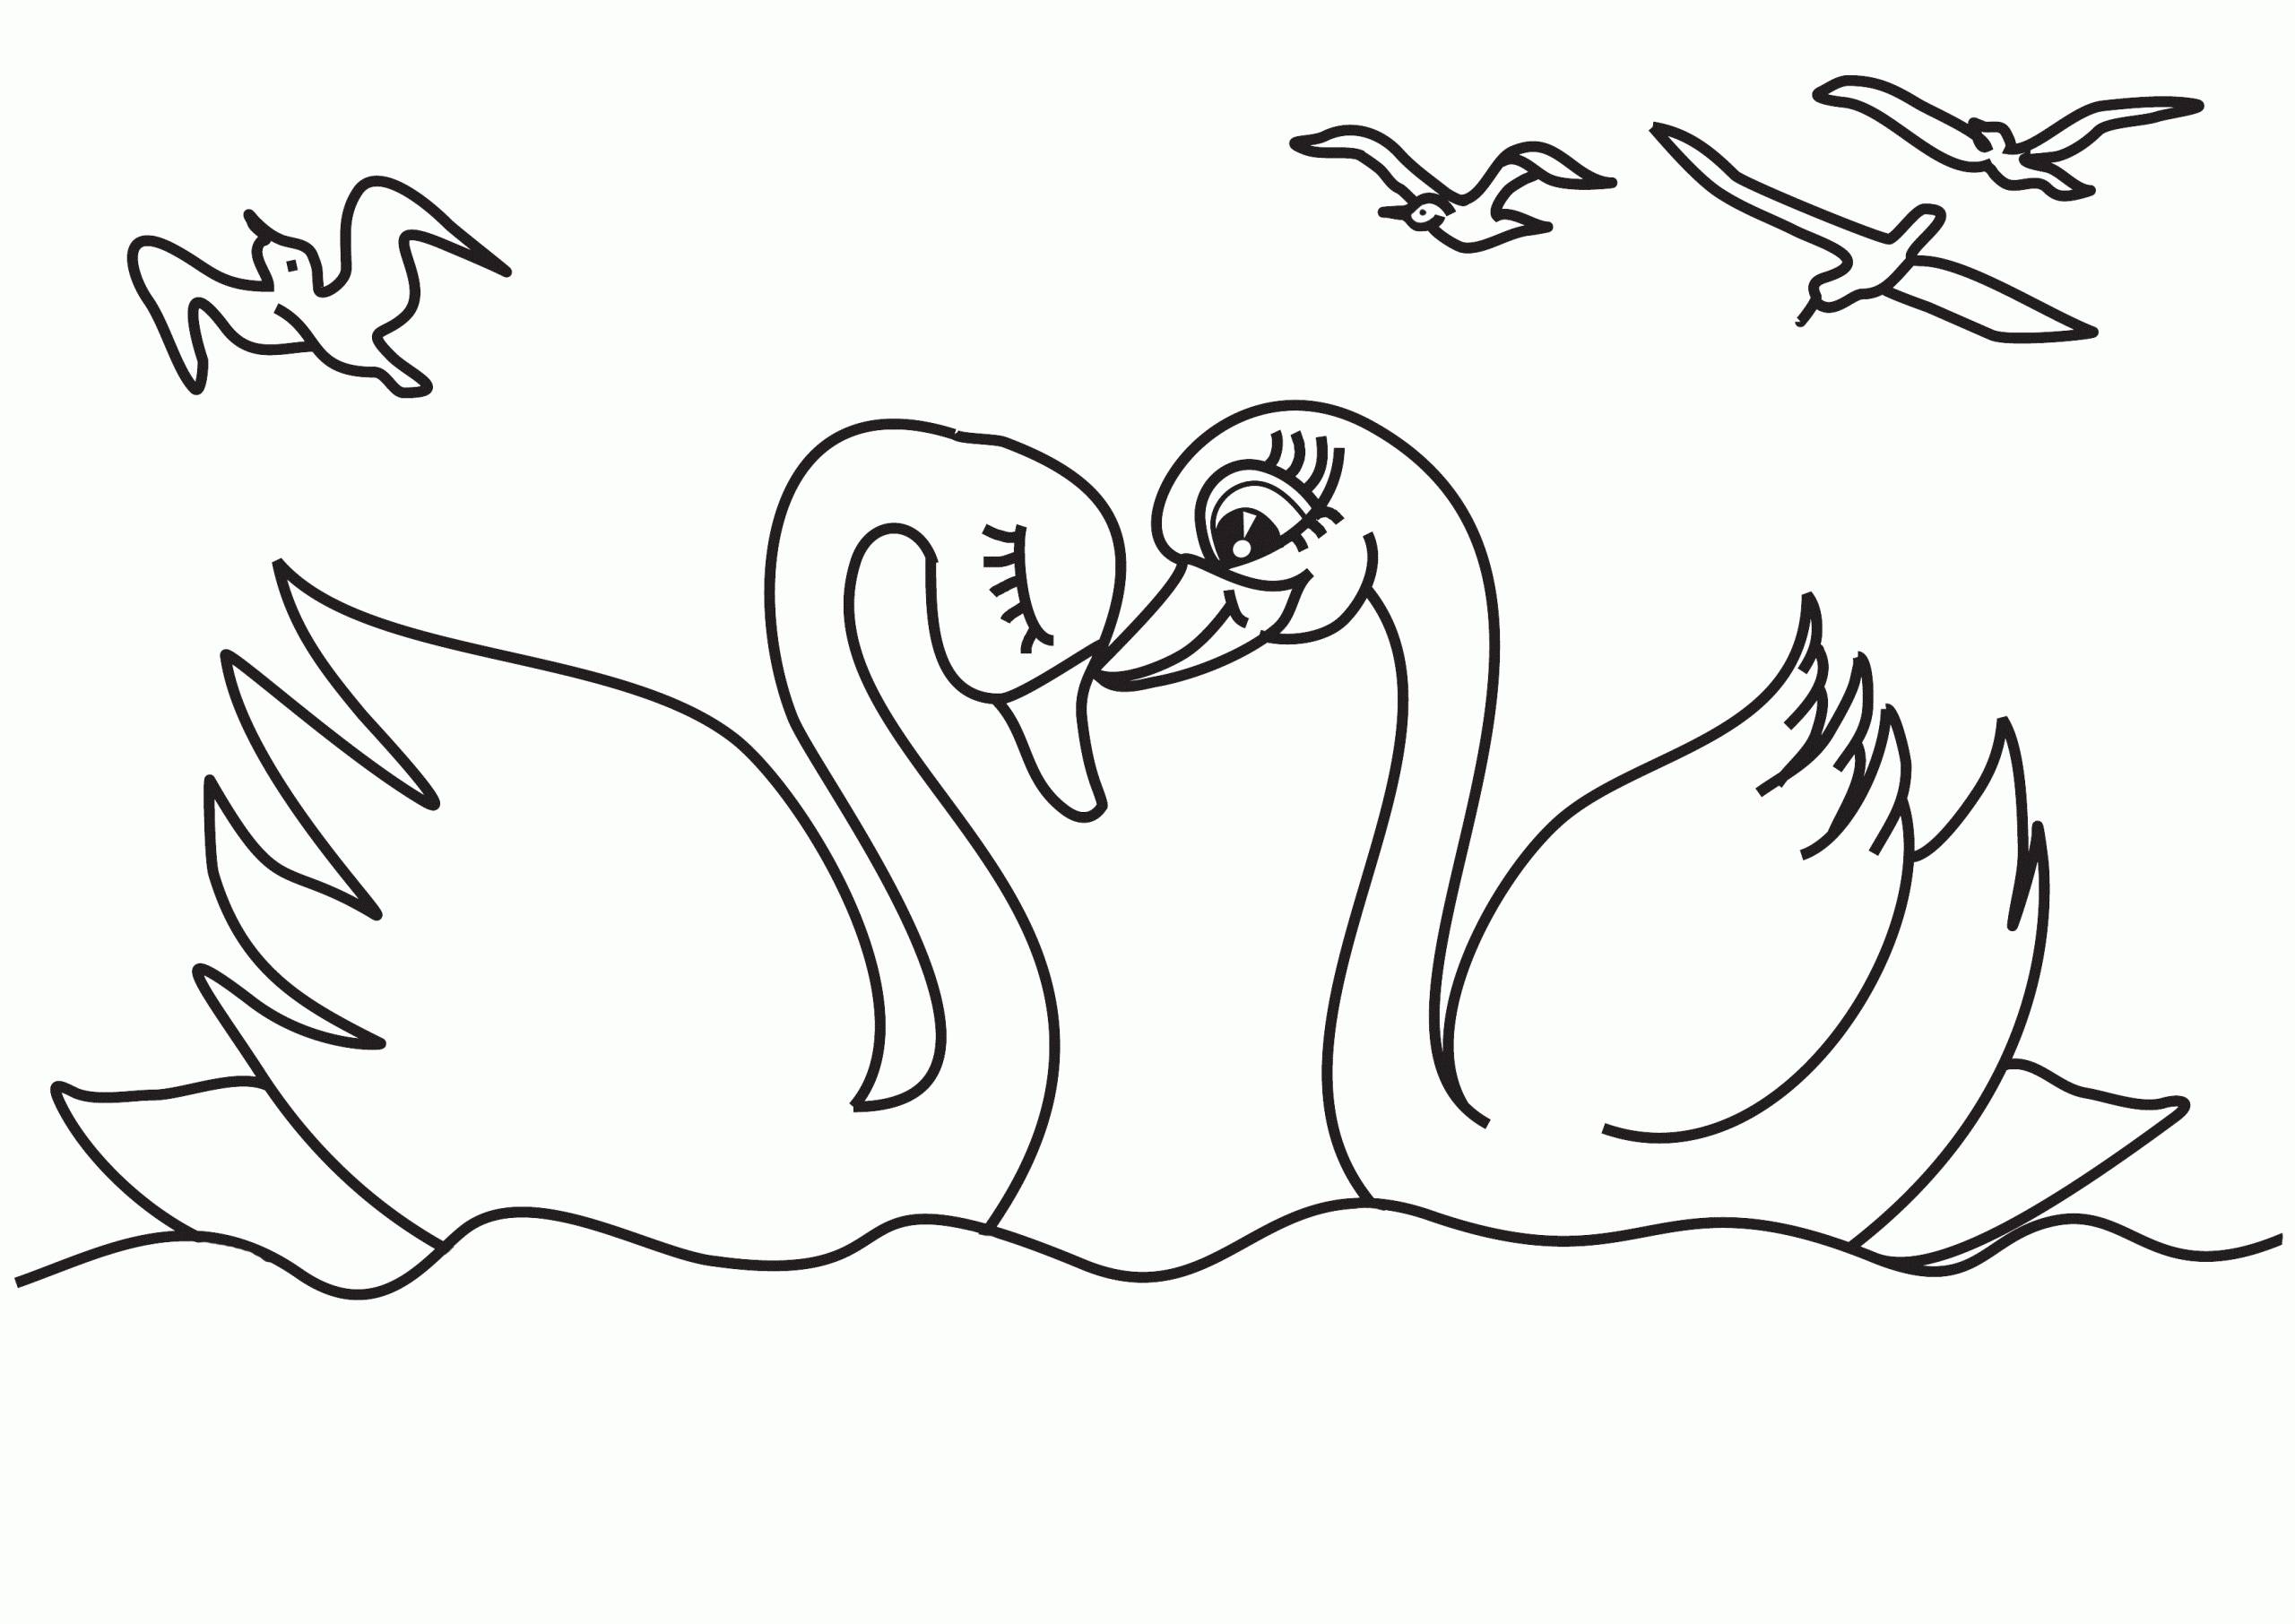 Swan coloring page two swans on the pond